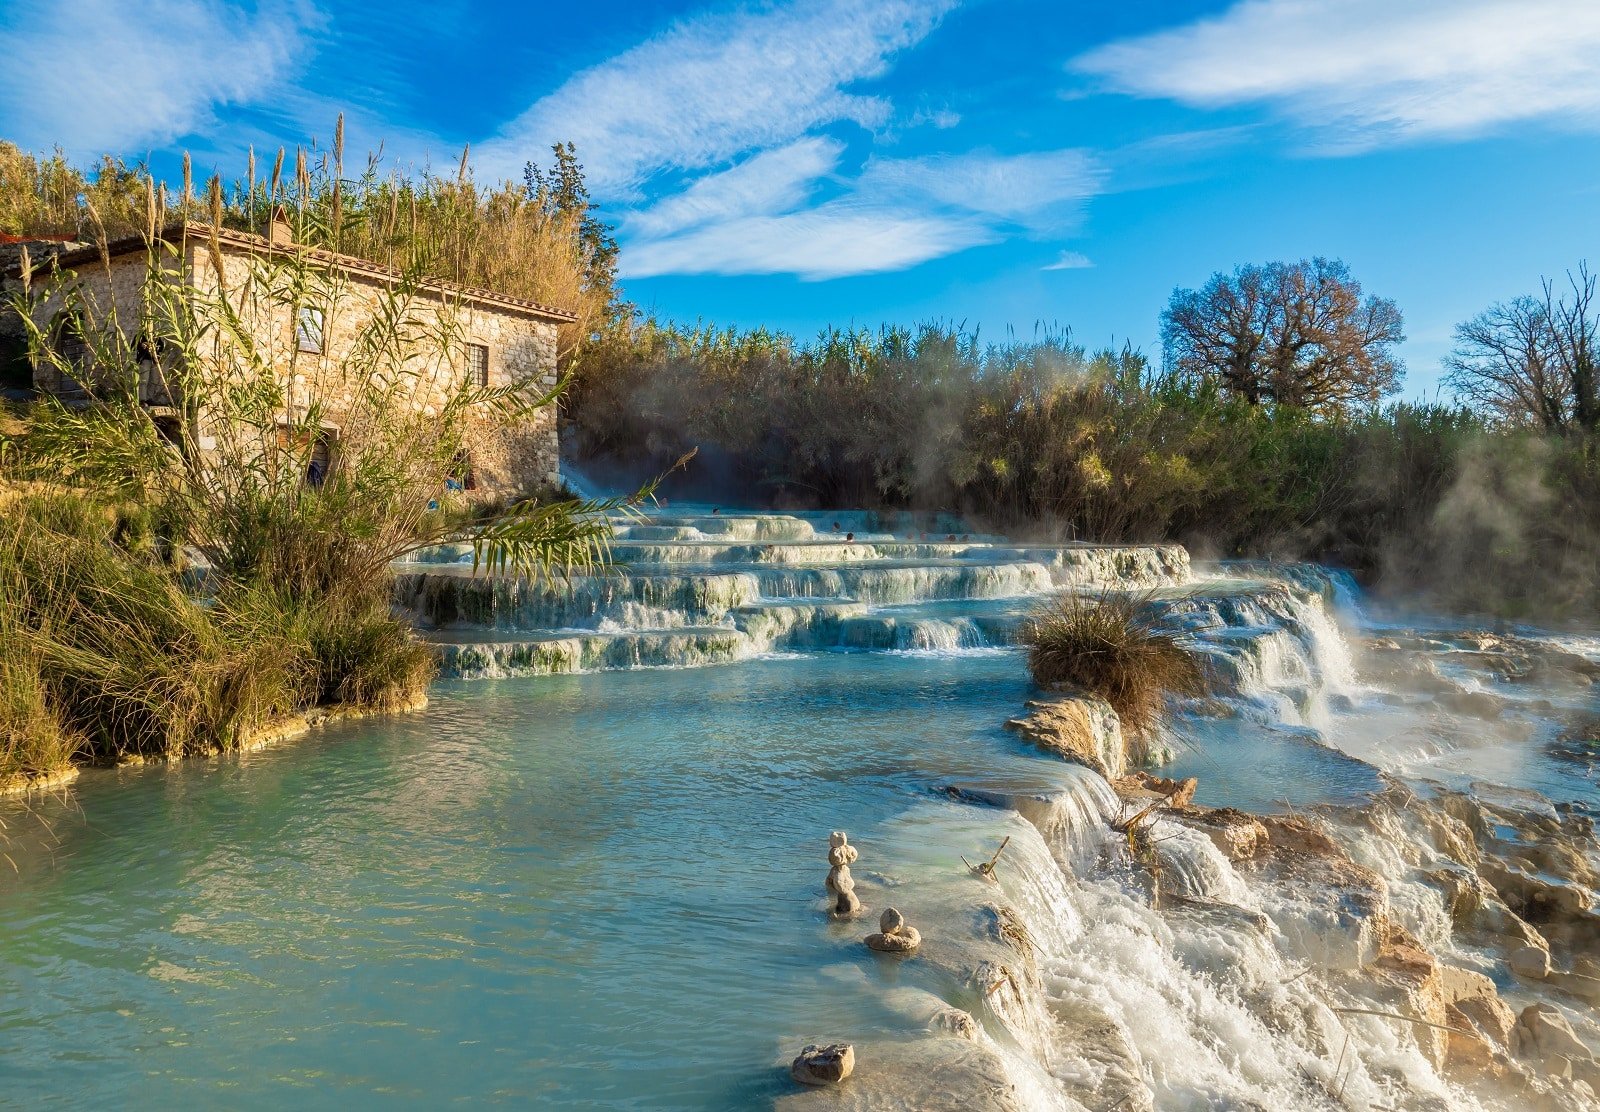 <p><span>In the heart of Tuscany, Italy, lies Terme di Saturnia, a spa resort renowned for its thermal springs that date back to ancient times. These sulfuric waters, naturally heated to a warm 37.5°C, are believed to have therapeutic properties, particularly for skin and rheumatic ailments.</span></p> <p><span>T</span><span>he resort offers a luxurious spa experience with a range of treatments, including mud therapy, hydrotherapy, and aesthetic medicine. Beyond the spa, guests can enjoy the stunning Tuscan landscape, with its rolling hills, vineyards, and medieval villages. The resort’s focus on wellness extends to its cuisine, offering dishes prepared with local, organic ingredients.</span></p> <p><b>Insider’s Tip: </b><span>Explore the nearby medieval village of Saturnia, with its charming streets and historical architecture.</span></p> <p><b>When To Travel: </b><span>Spring and autumn are ideal for visiting, offering pleasant weather and fewer crowds.</span></p> <p><b>How To Get There: </b><span>The nearest major airport is in Rome, from which Terme di Saturnia is a two-hour drive.</span></p>